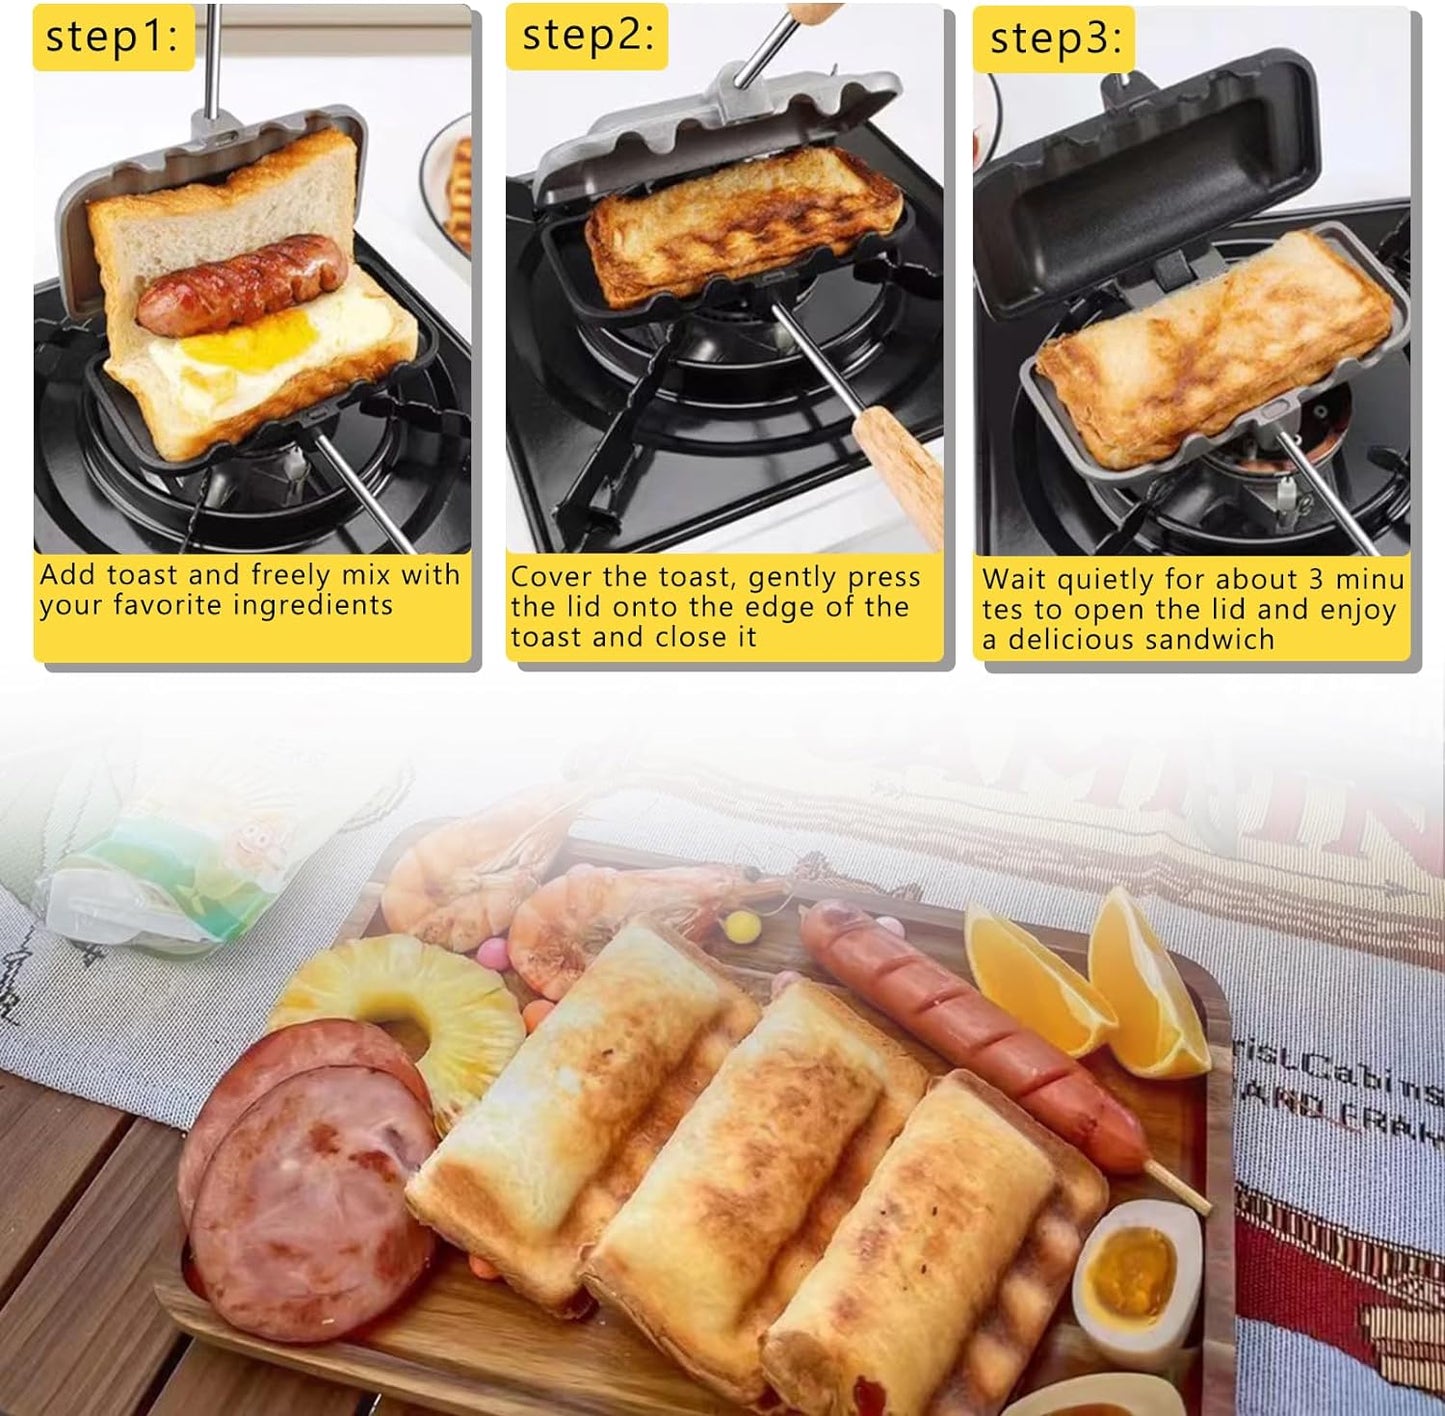 Removable Sandwich Baking Tray Kitchen Double Sided Skillet Toast Bread Baking Pan